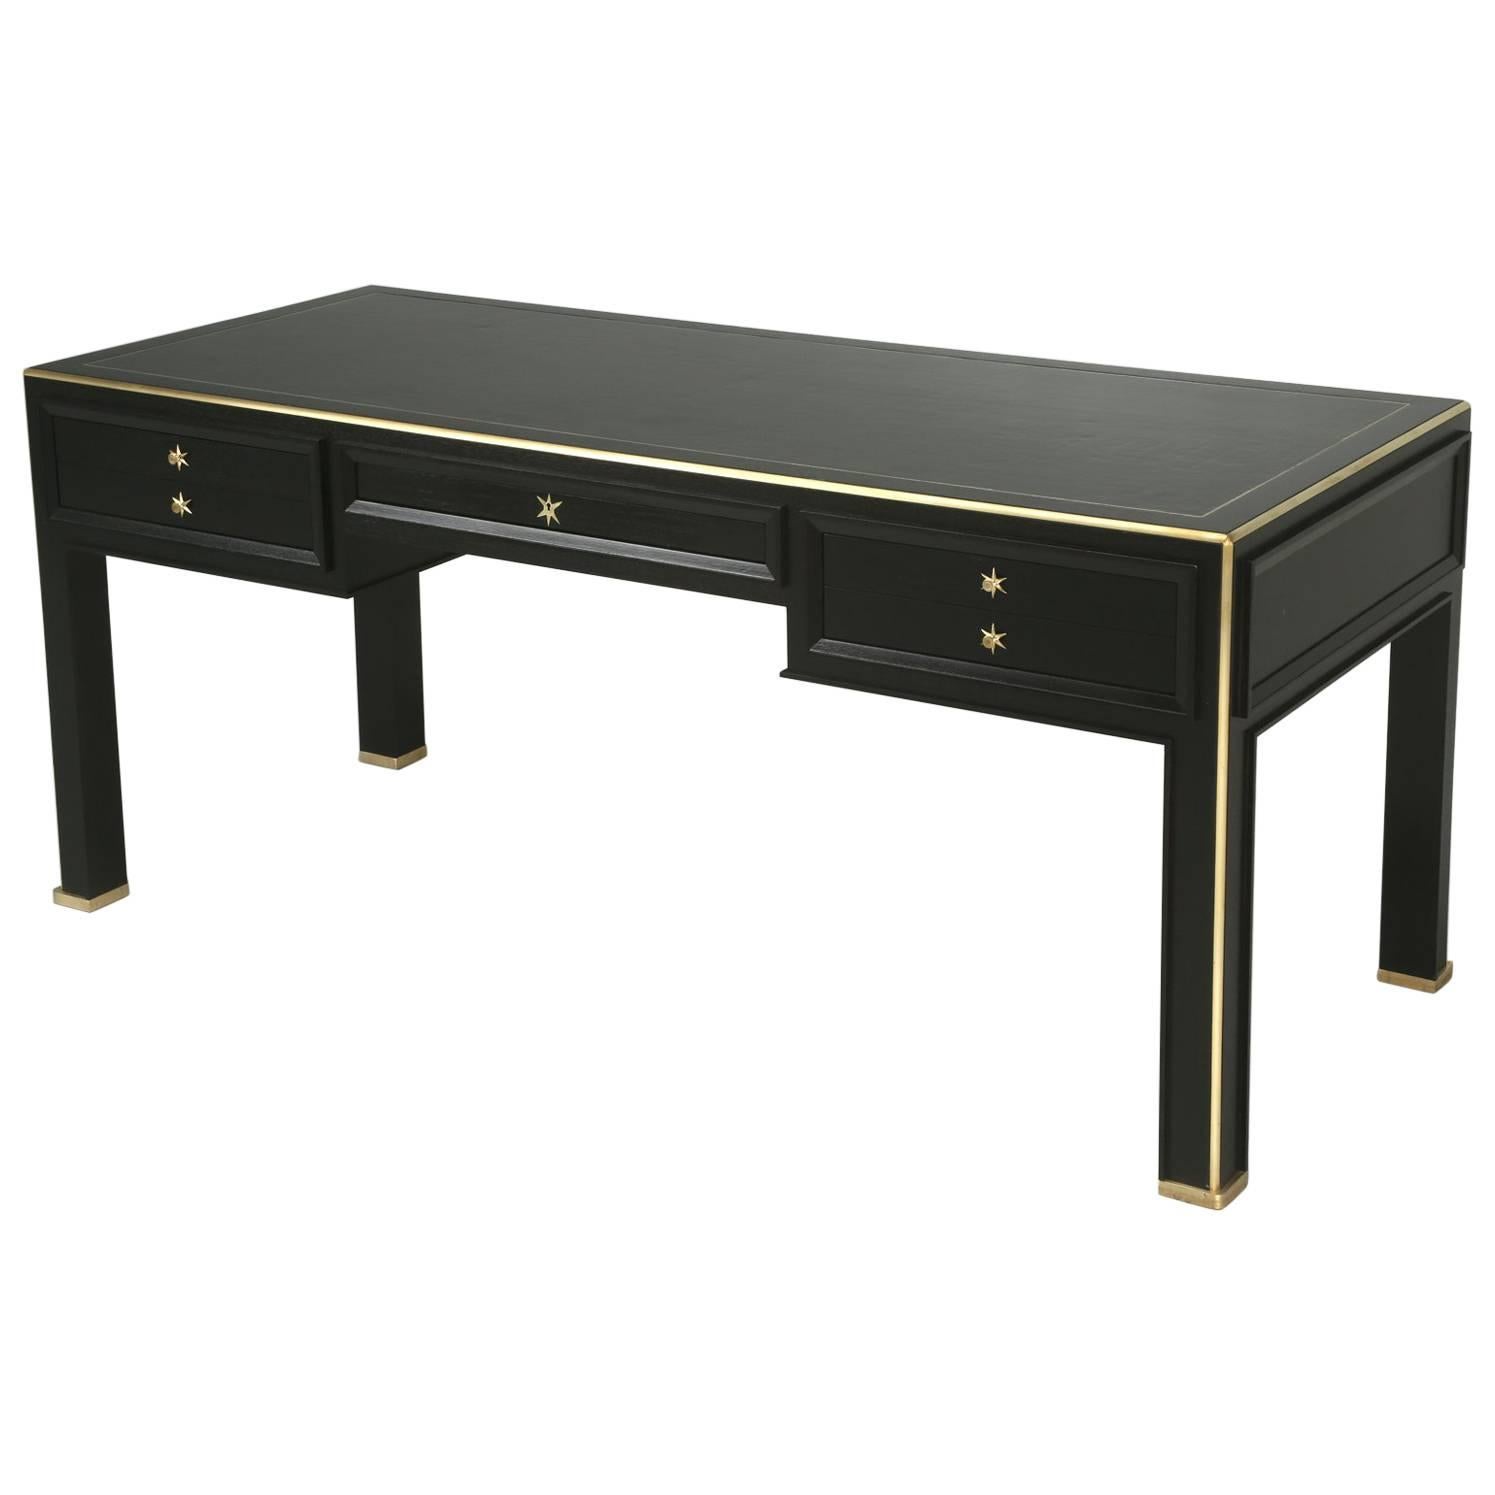 Jacques Adnet Inspired Desk in Solid Mahogany and Solid Brass Trim in Any Size